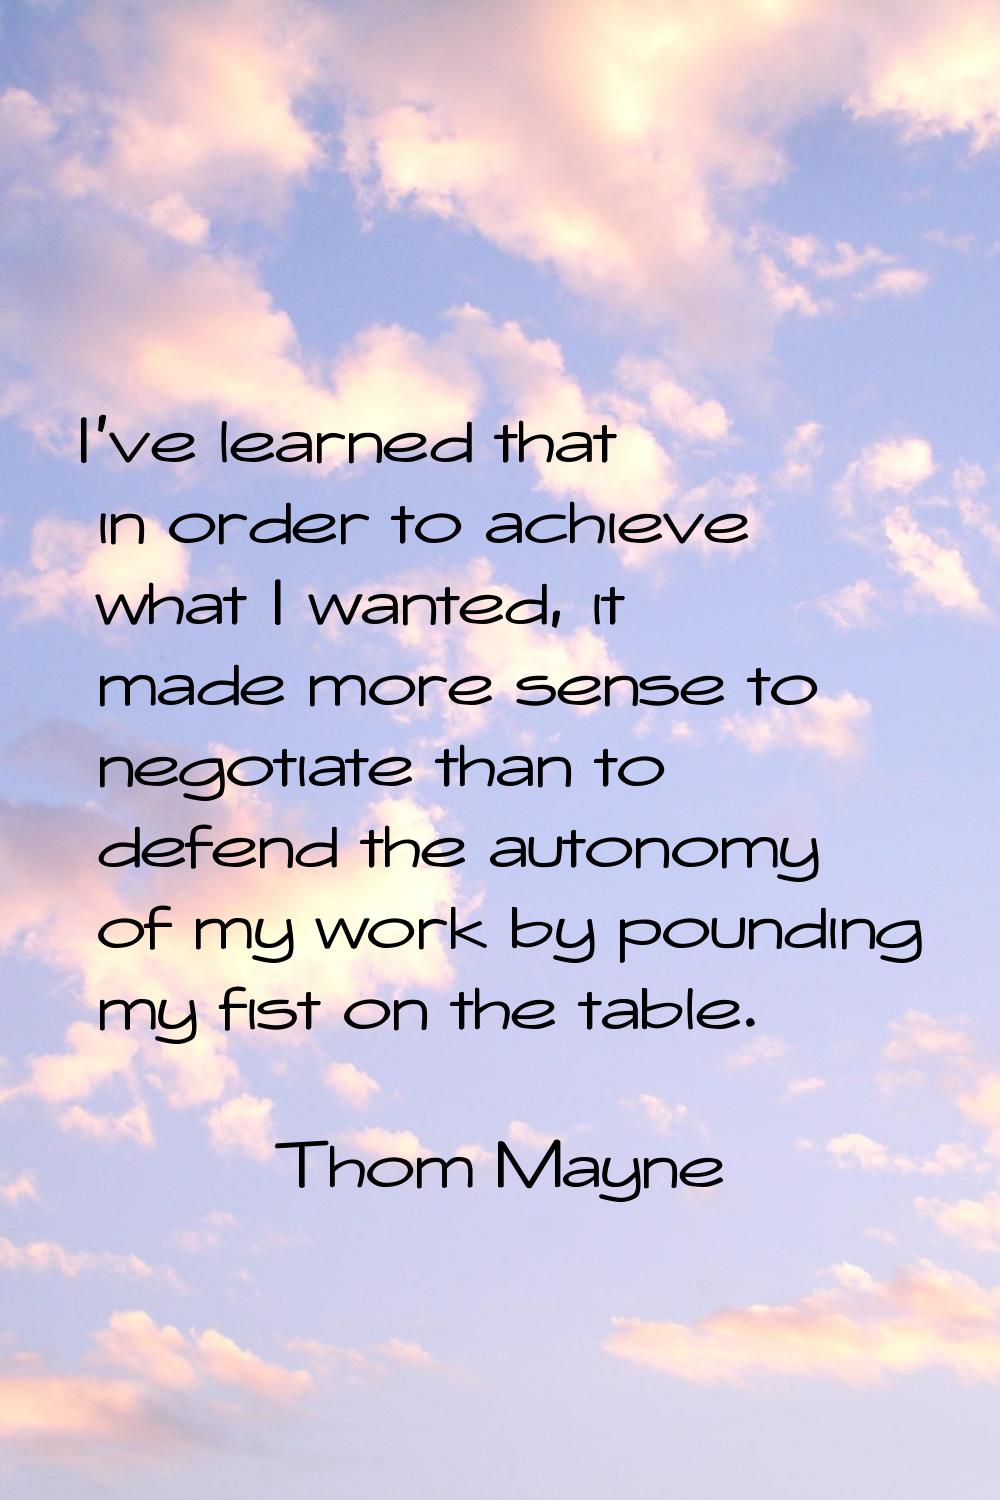 I've learned that in order to achieve what I wanted, it made more sense to negotiate than to defend